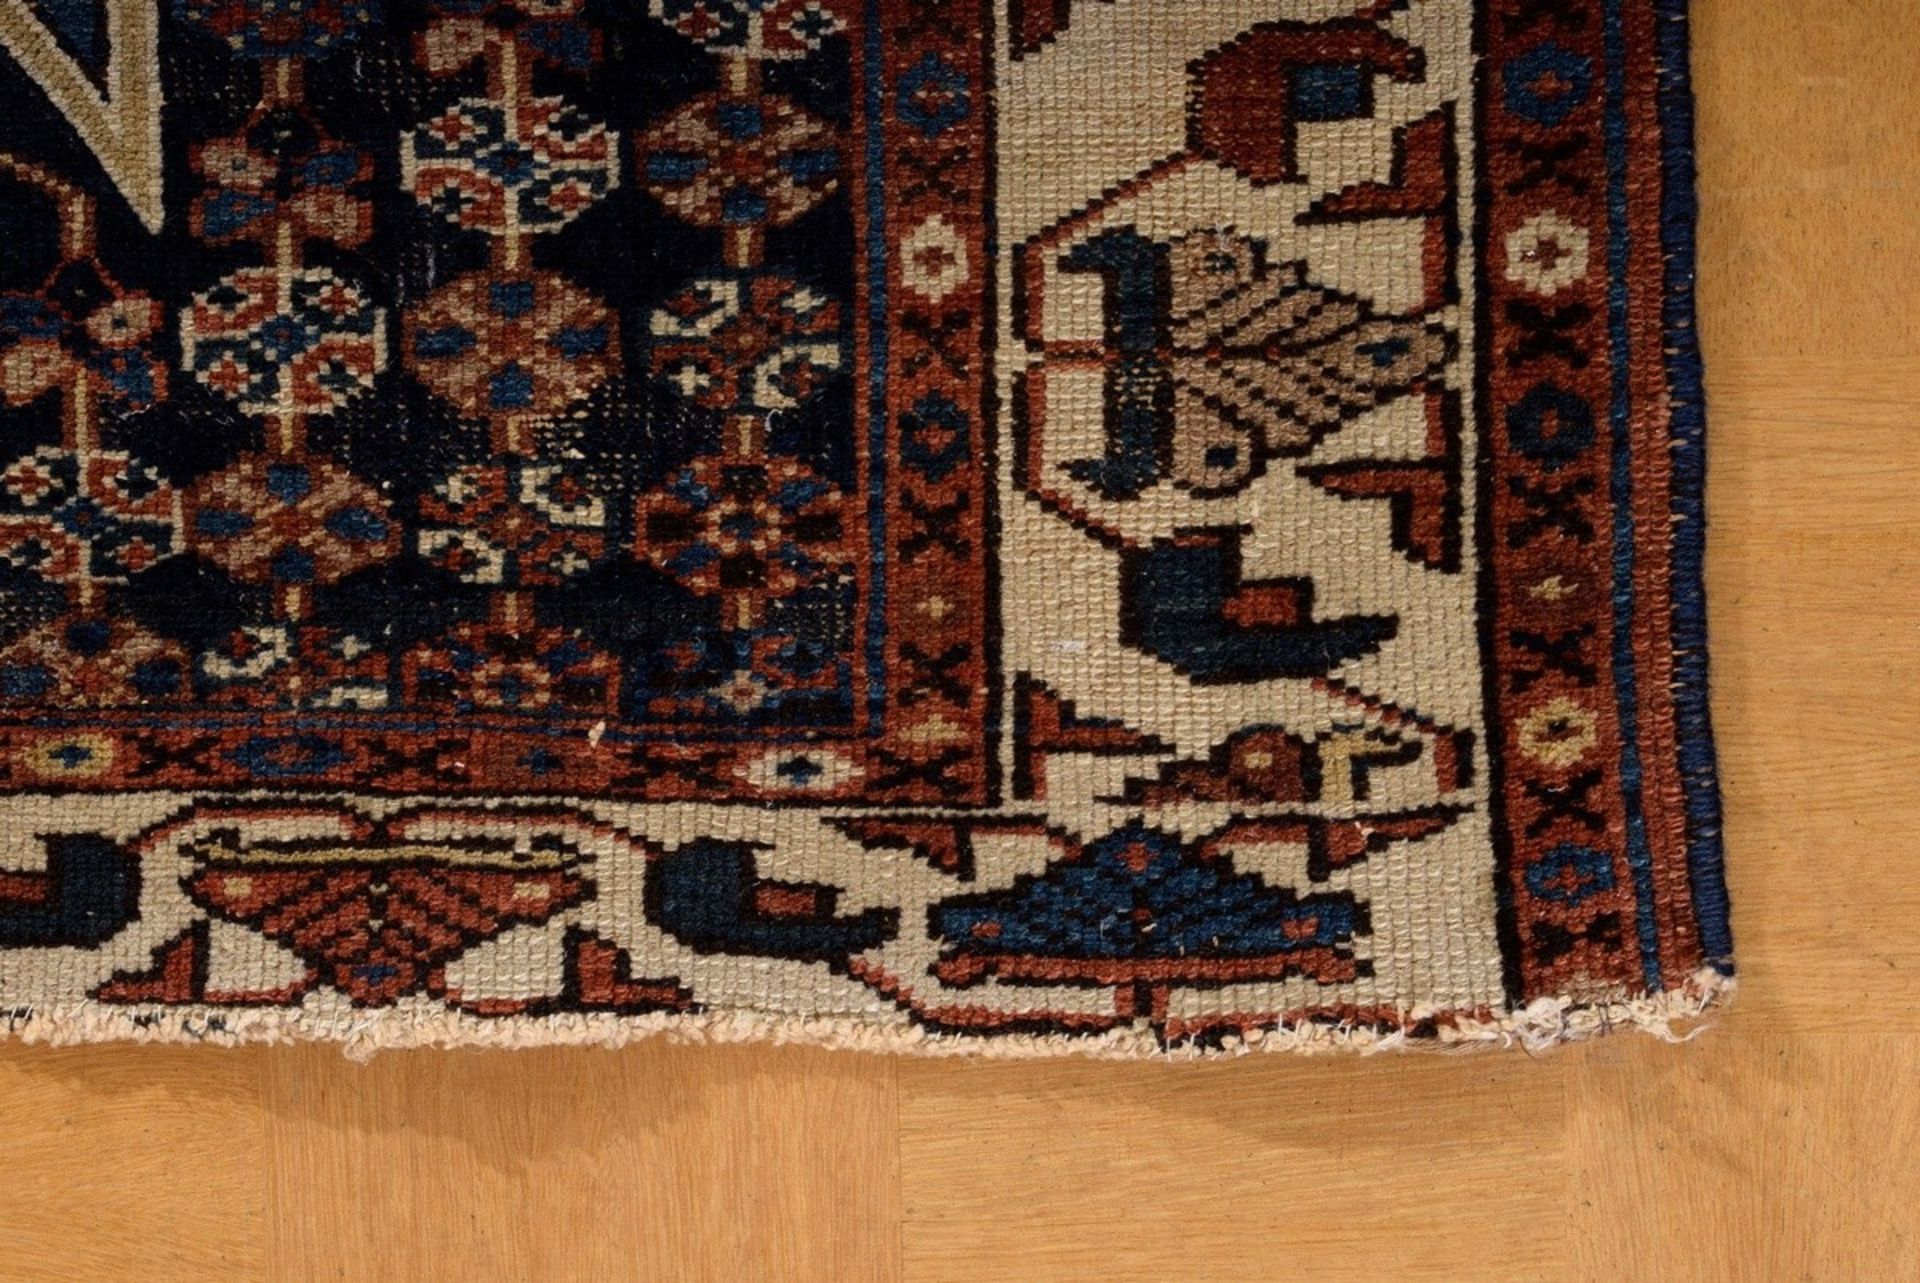 Mazlaghan carpet with typical outline of sharp serrations around the central medallion on a pattern - Image 4 of 6